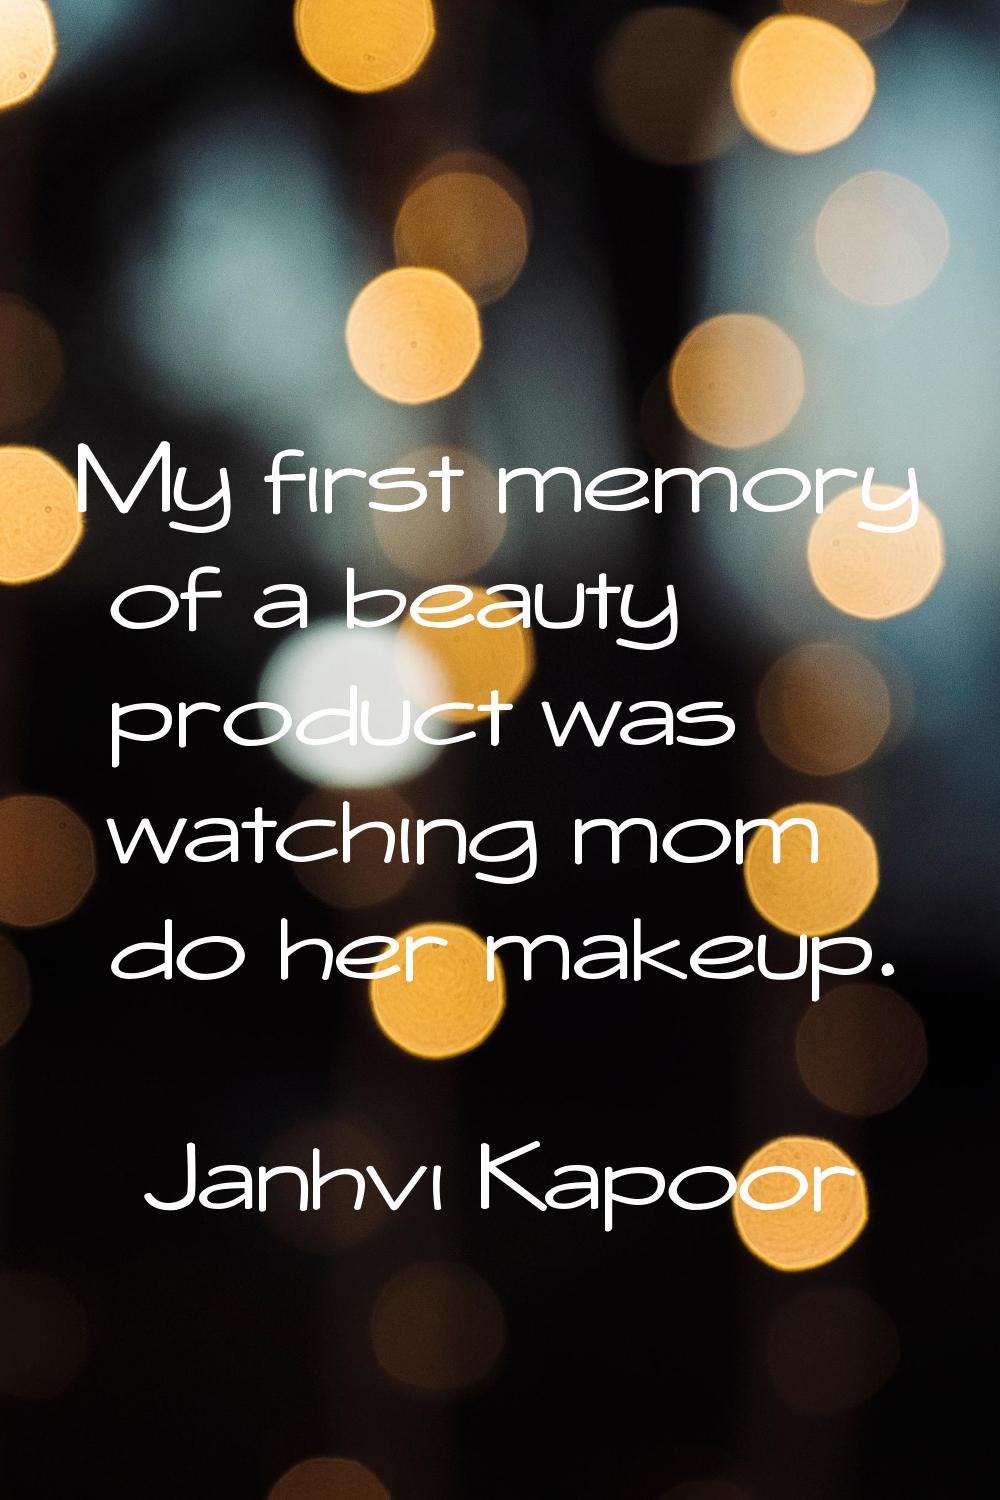 My first memory of a beauty product was watching mom do her makeup.